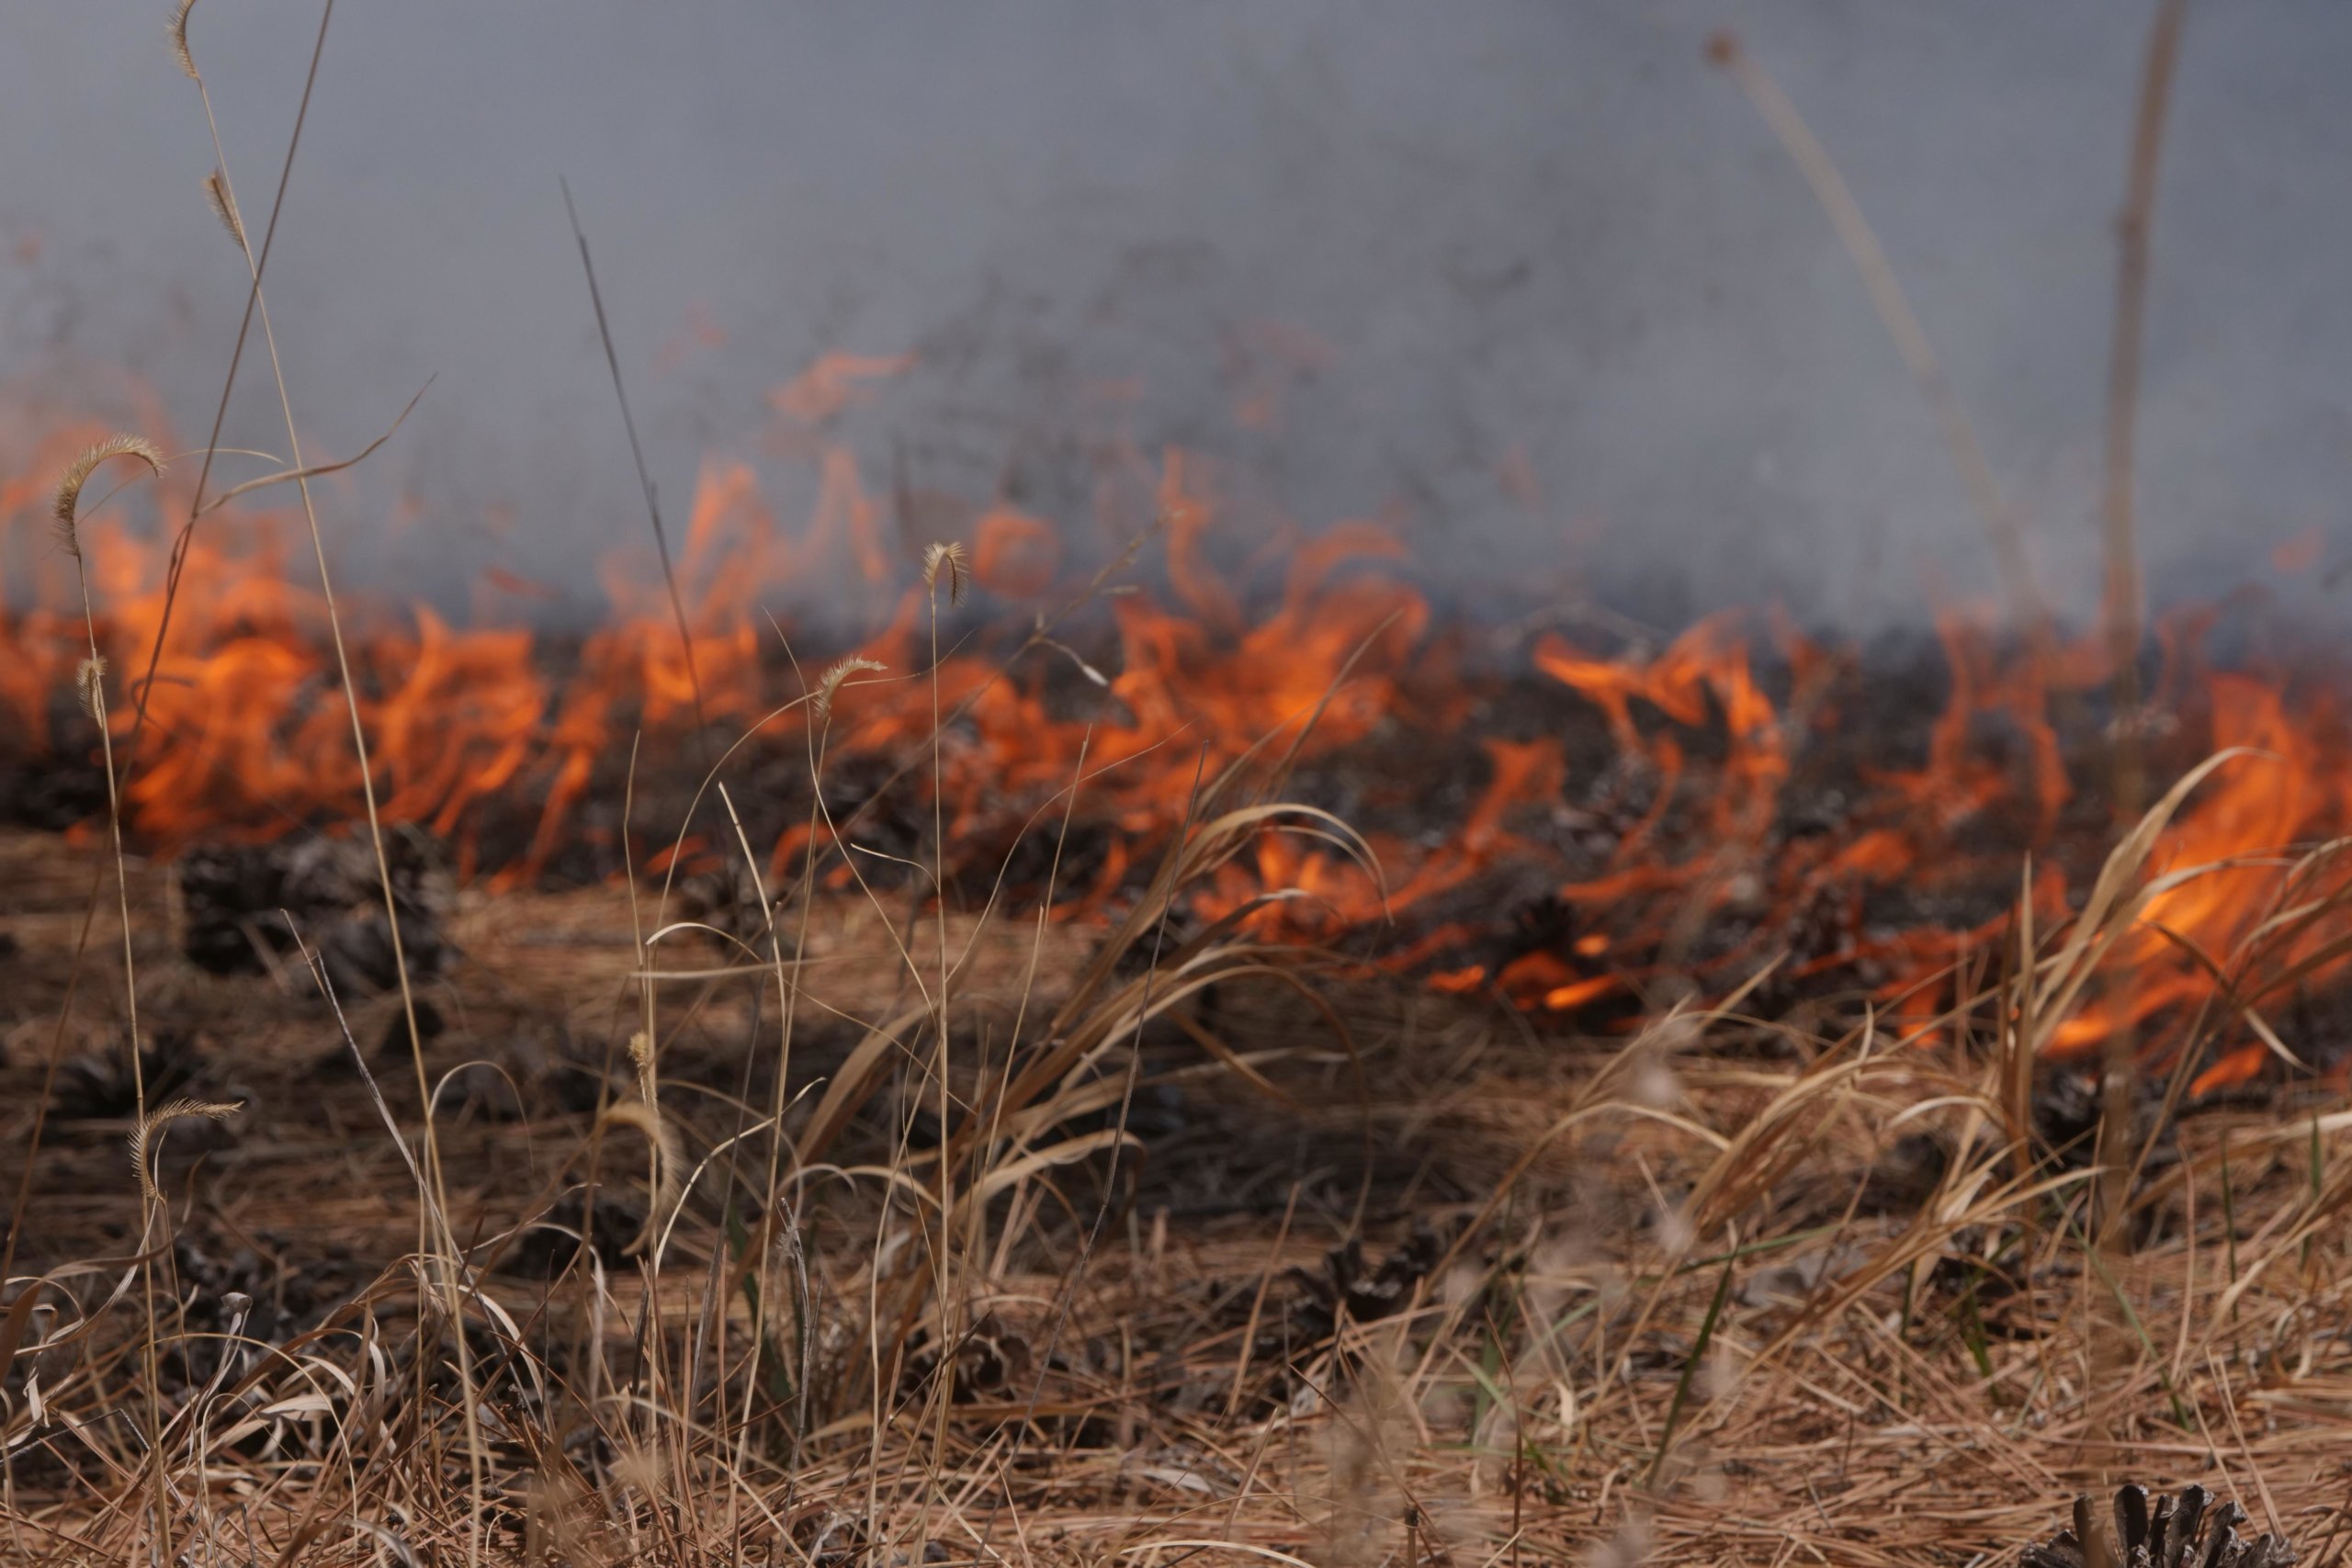 Spring burn ban bill brought off table, amended version passes Senate committee